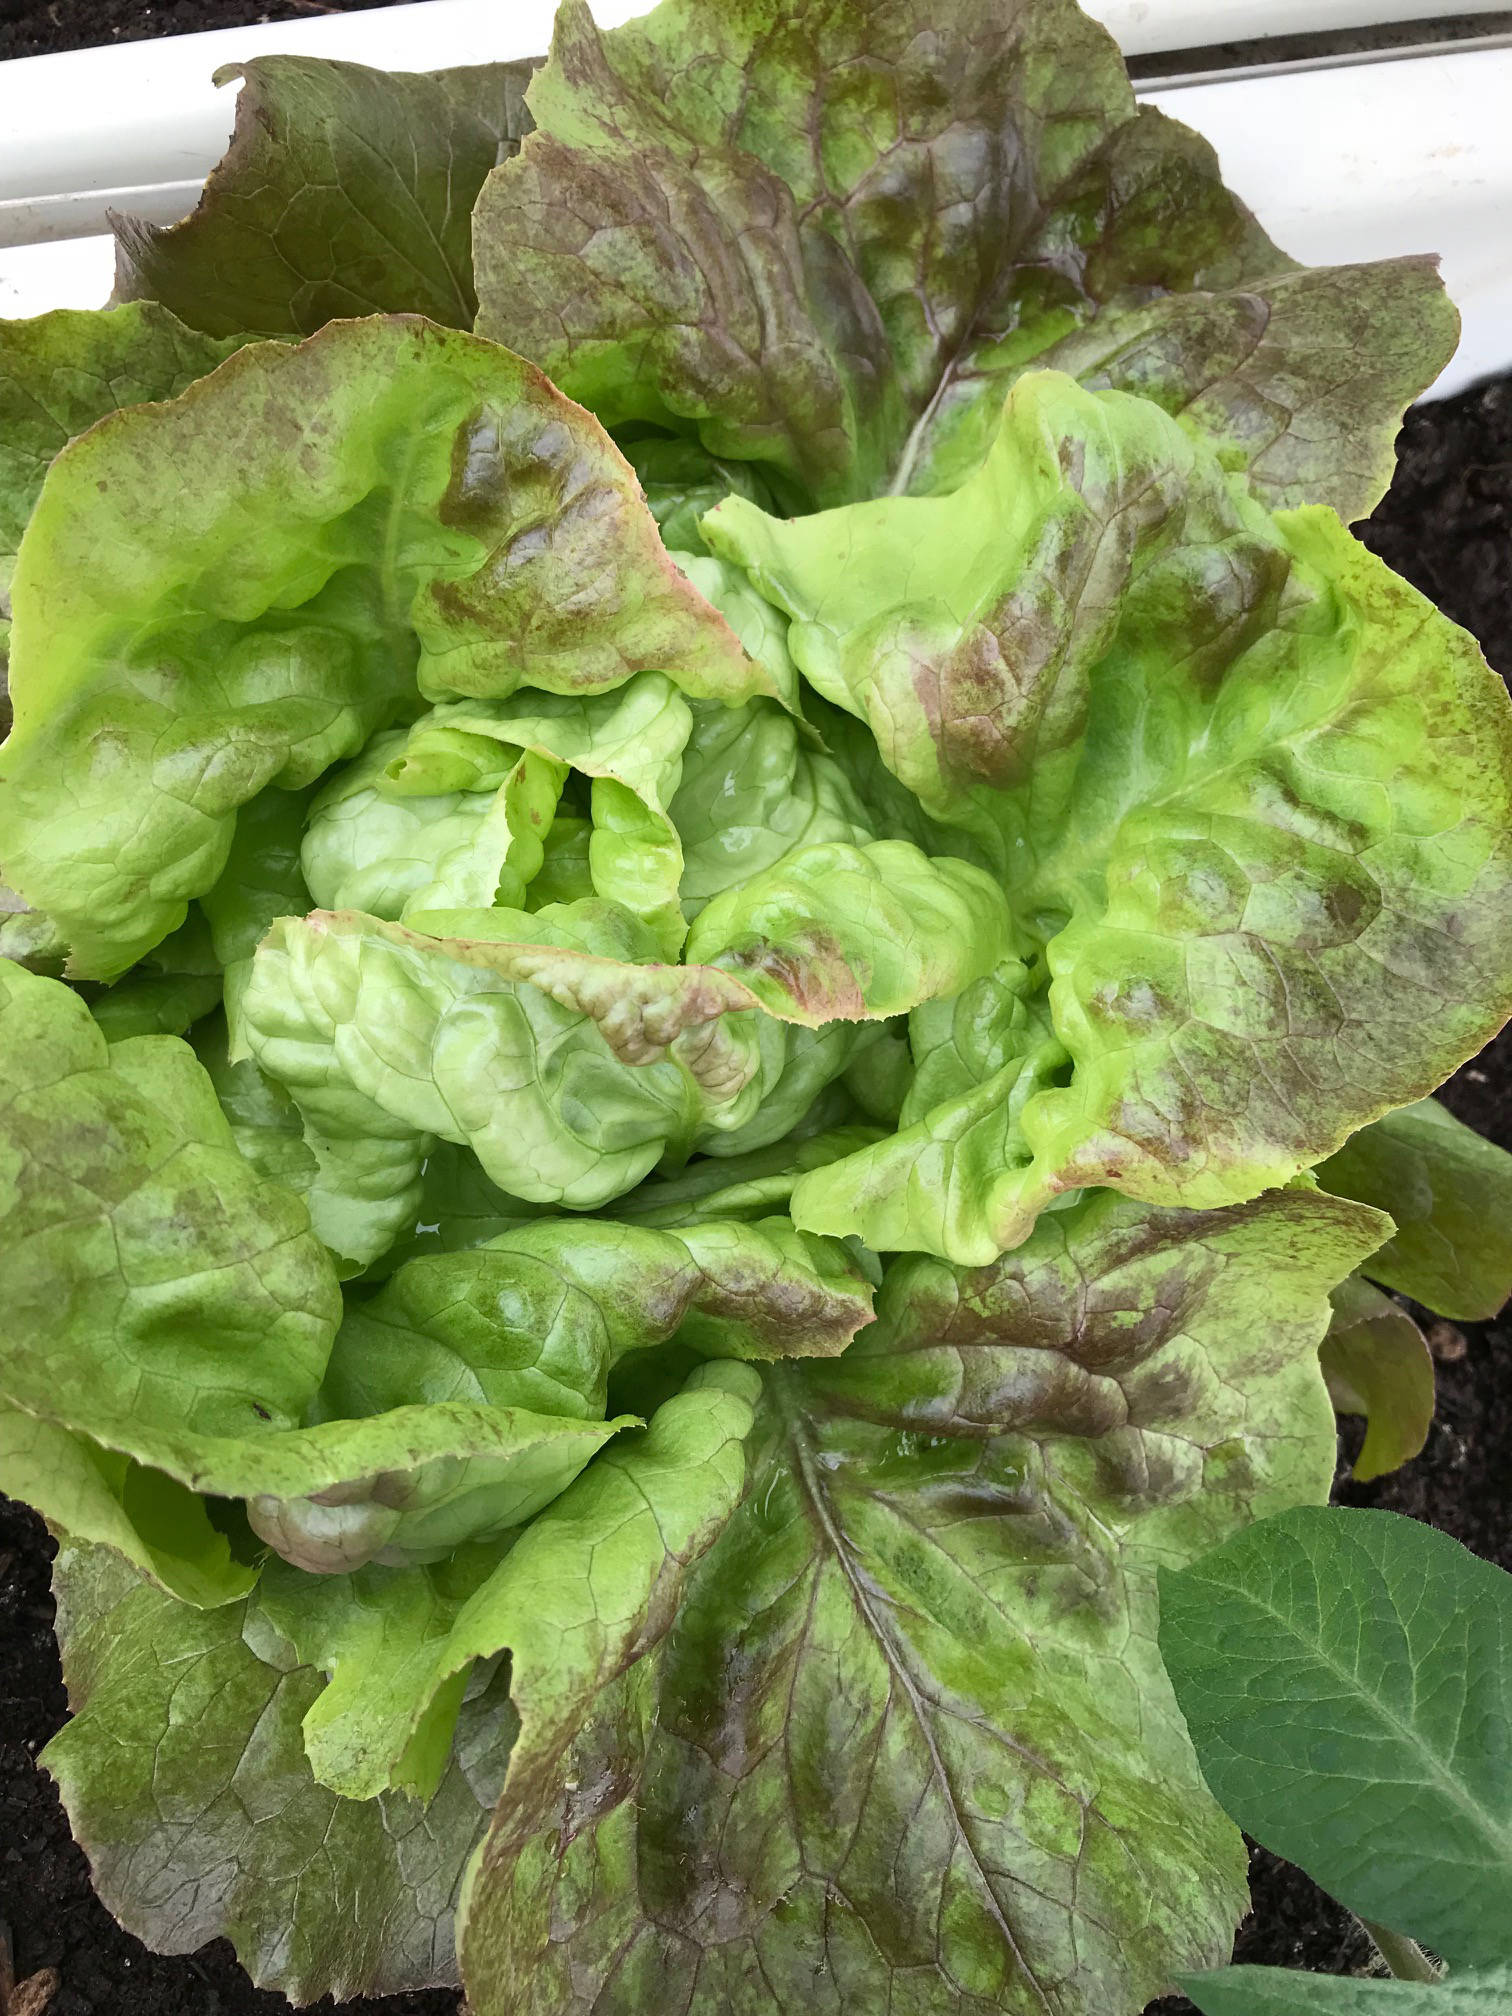 Skyphos lettuce thriving in the greenhouse. (Photo by Rosemary Fitzpatrick)